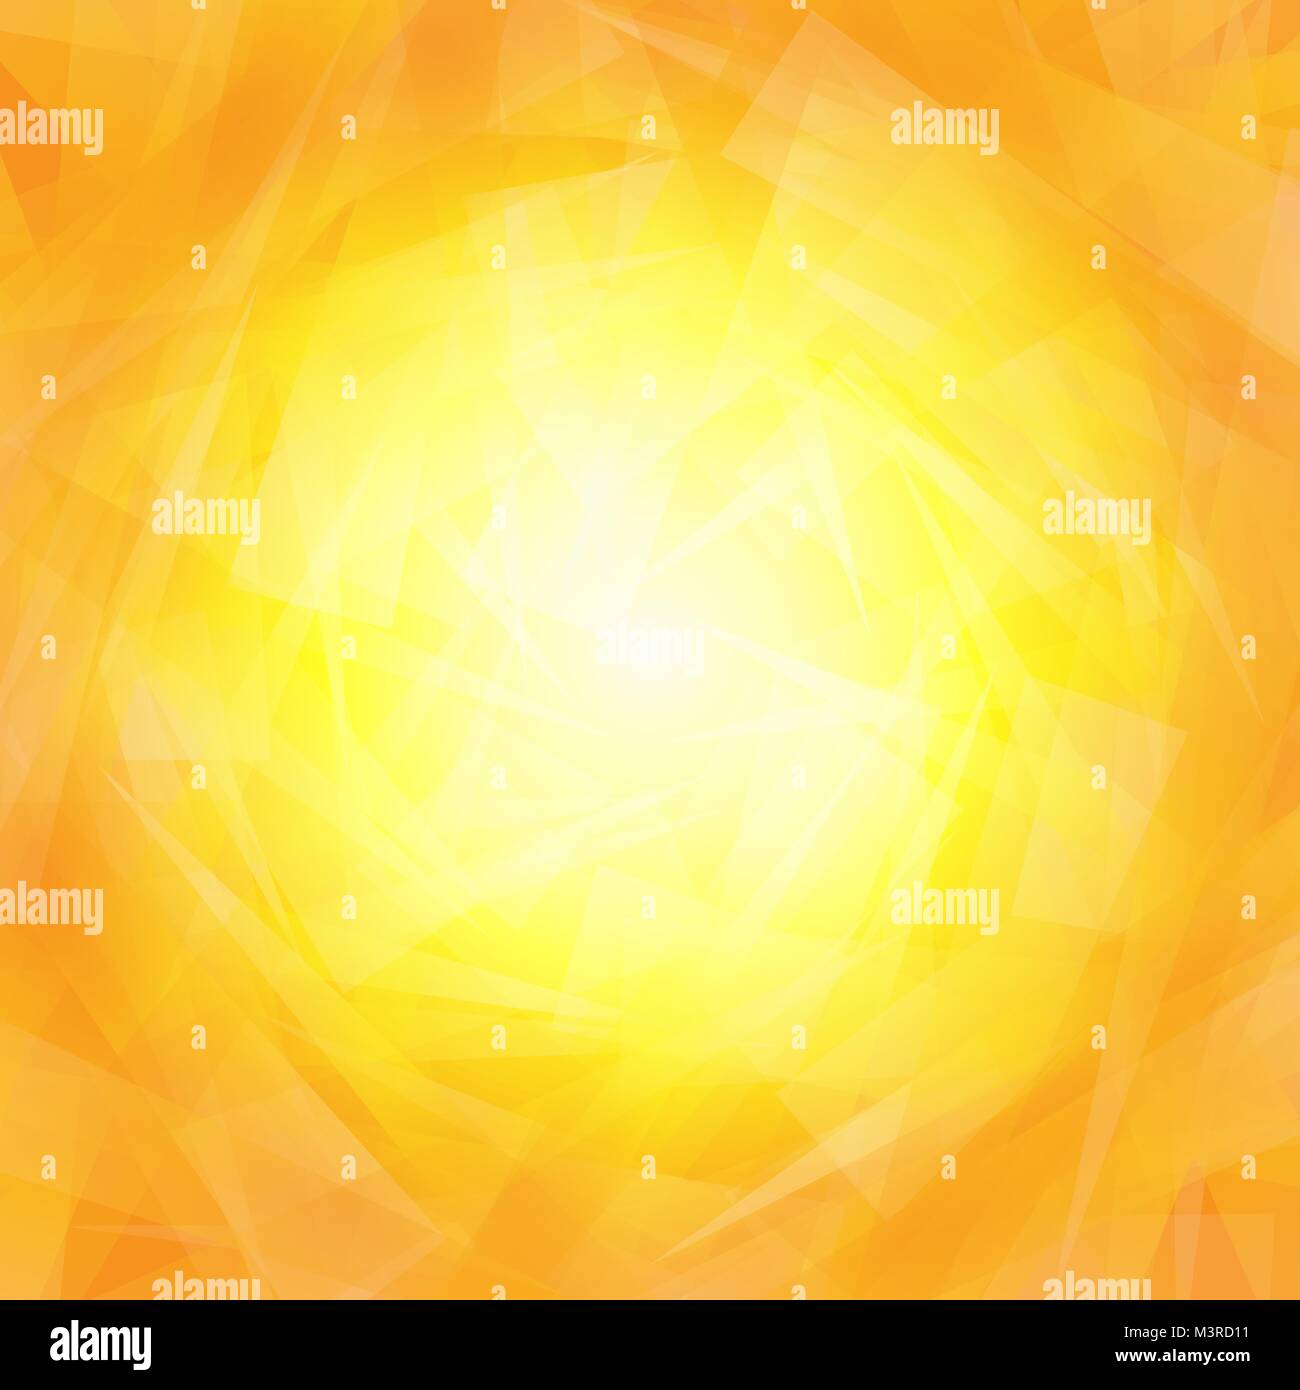 Vibrant yellow orange background with triangles Stock Vector